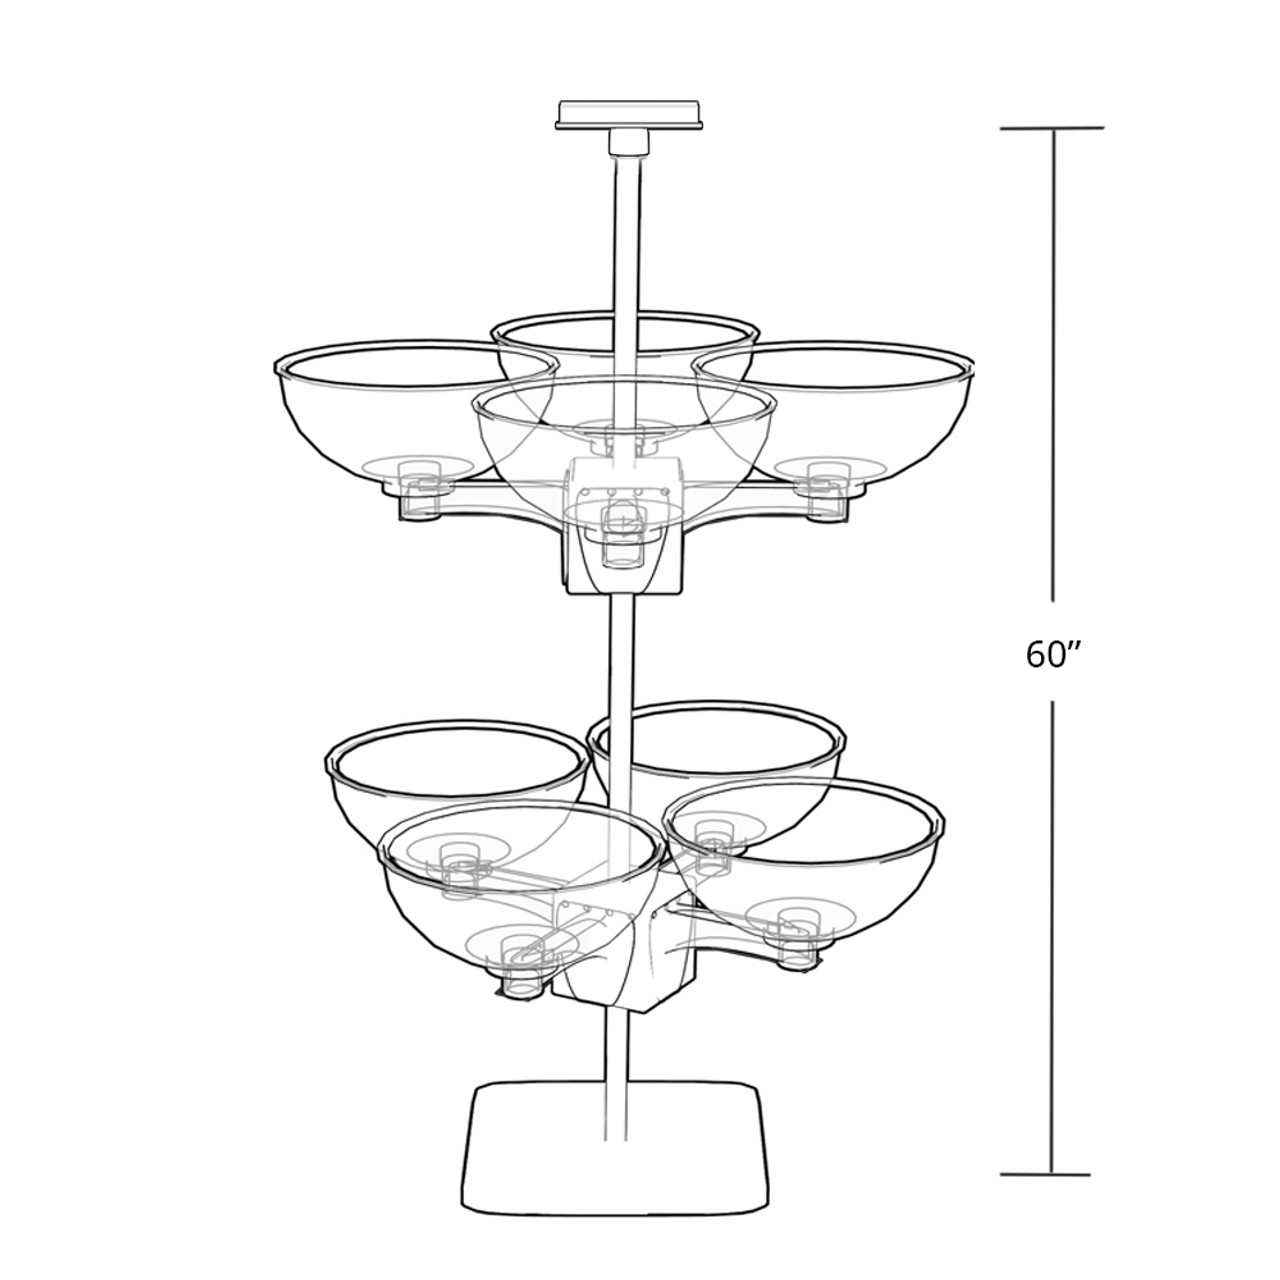 Azar Displays 750344 Quad Arm Bowl Tower 14 Pack of 1 14 Pack of 1 